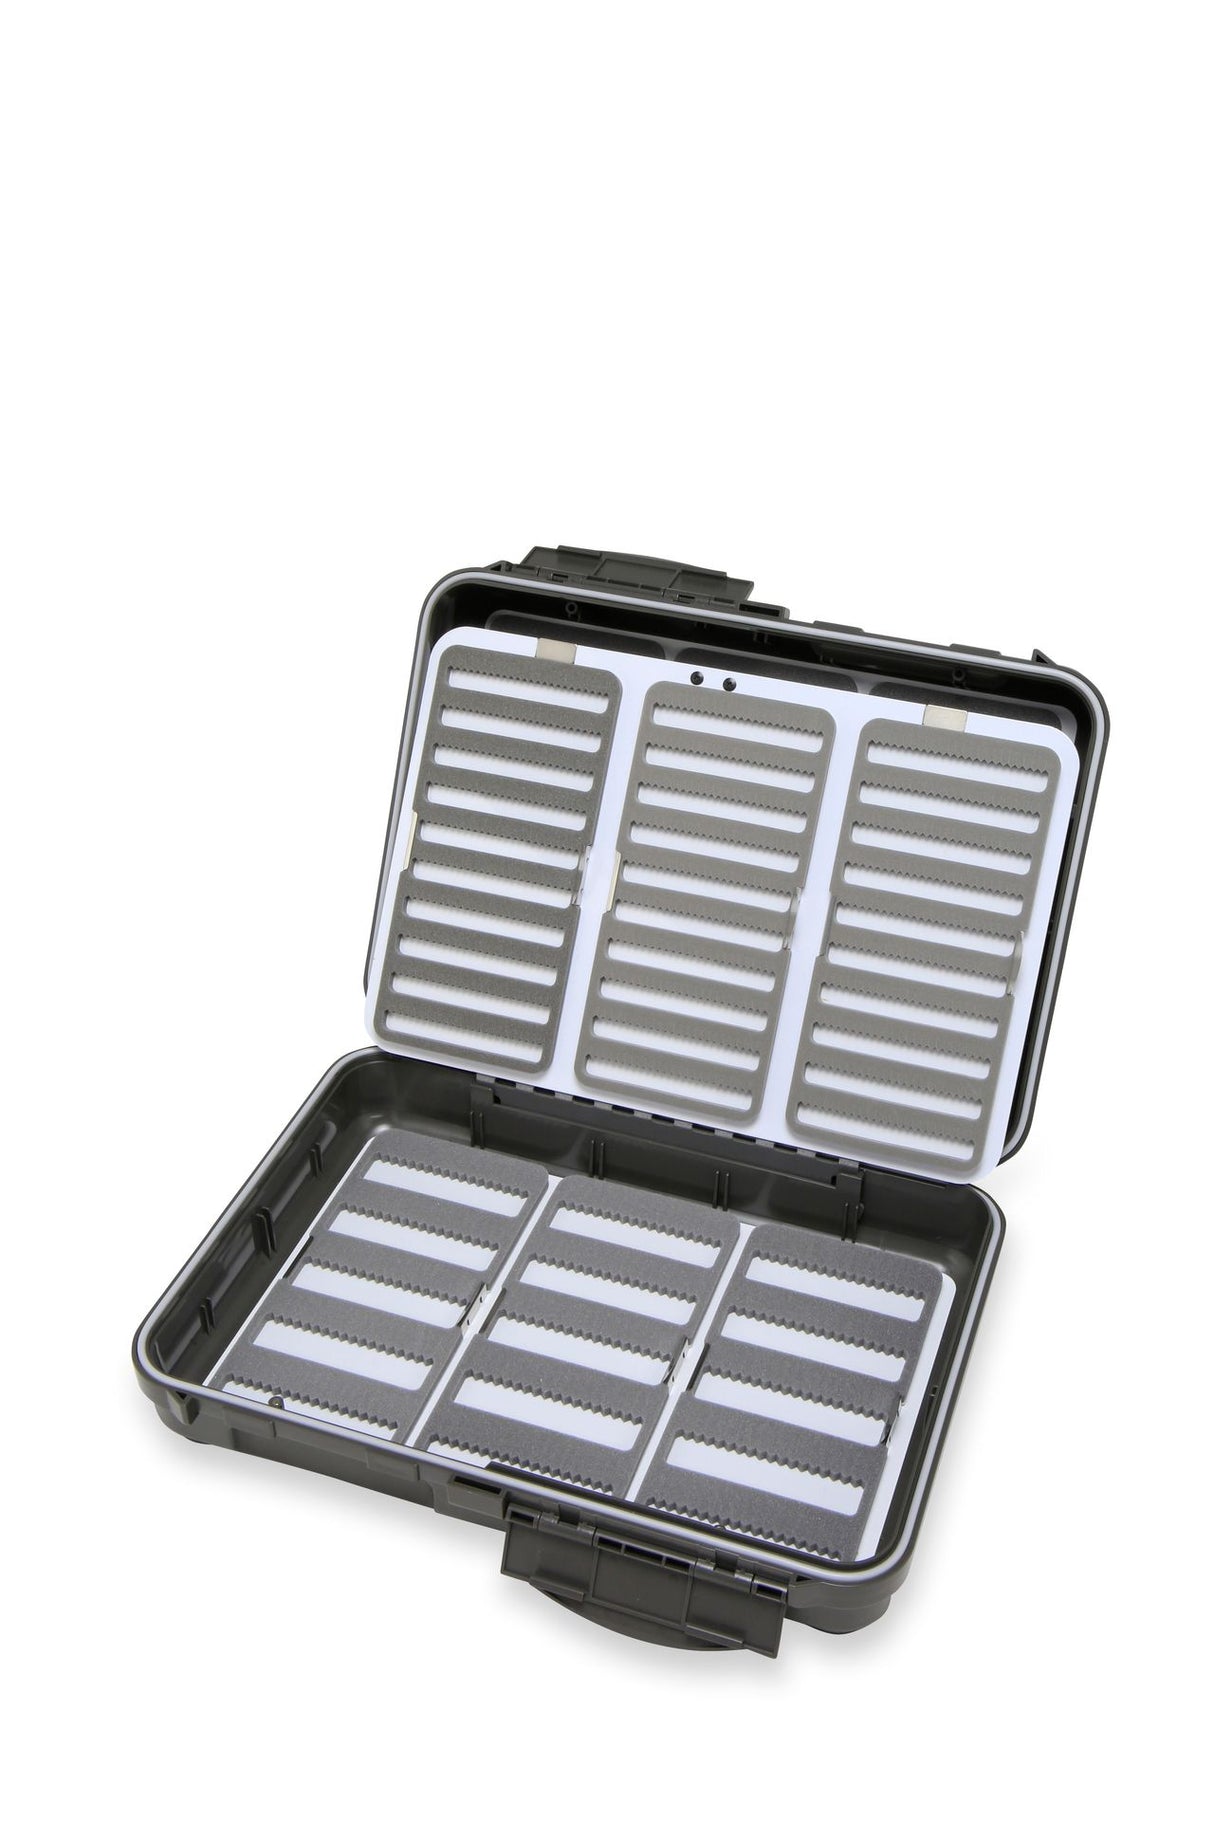 C&F Design Trout Guide Box incl. 12 Large System Foams